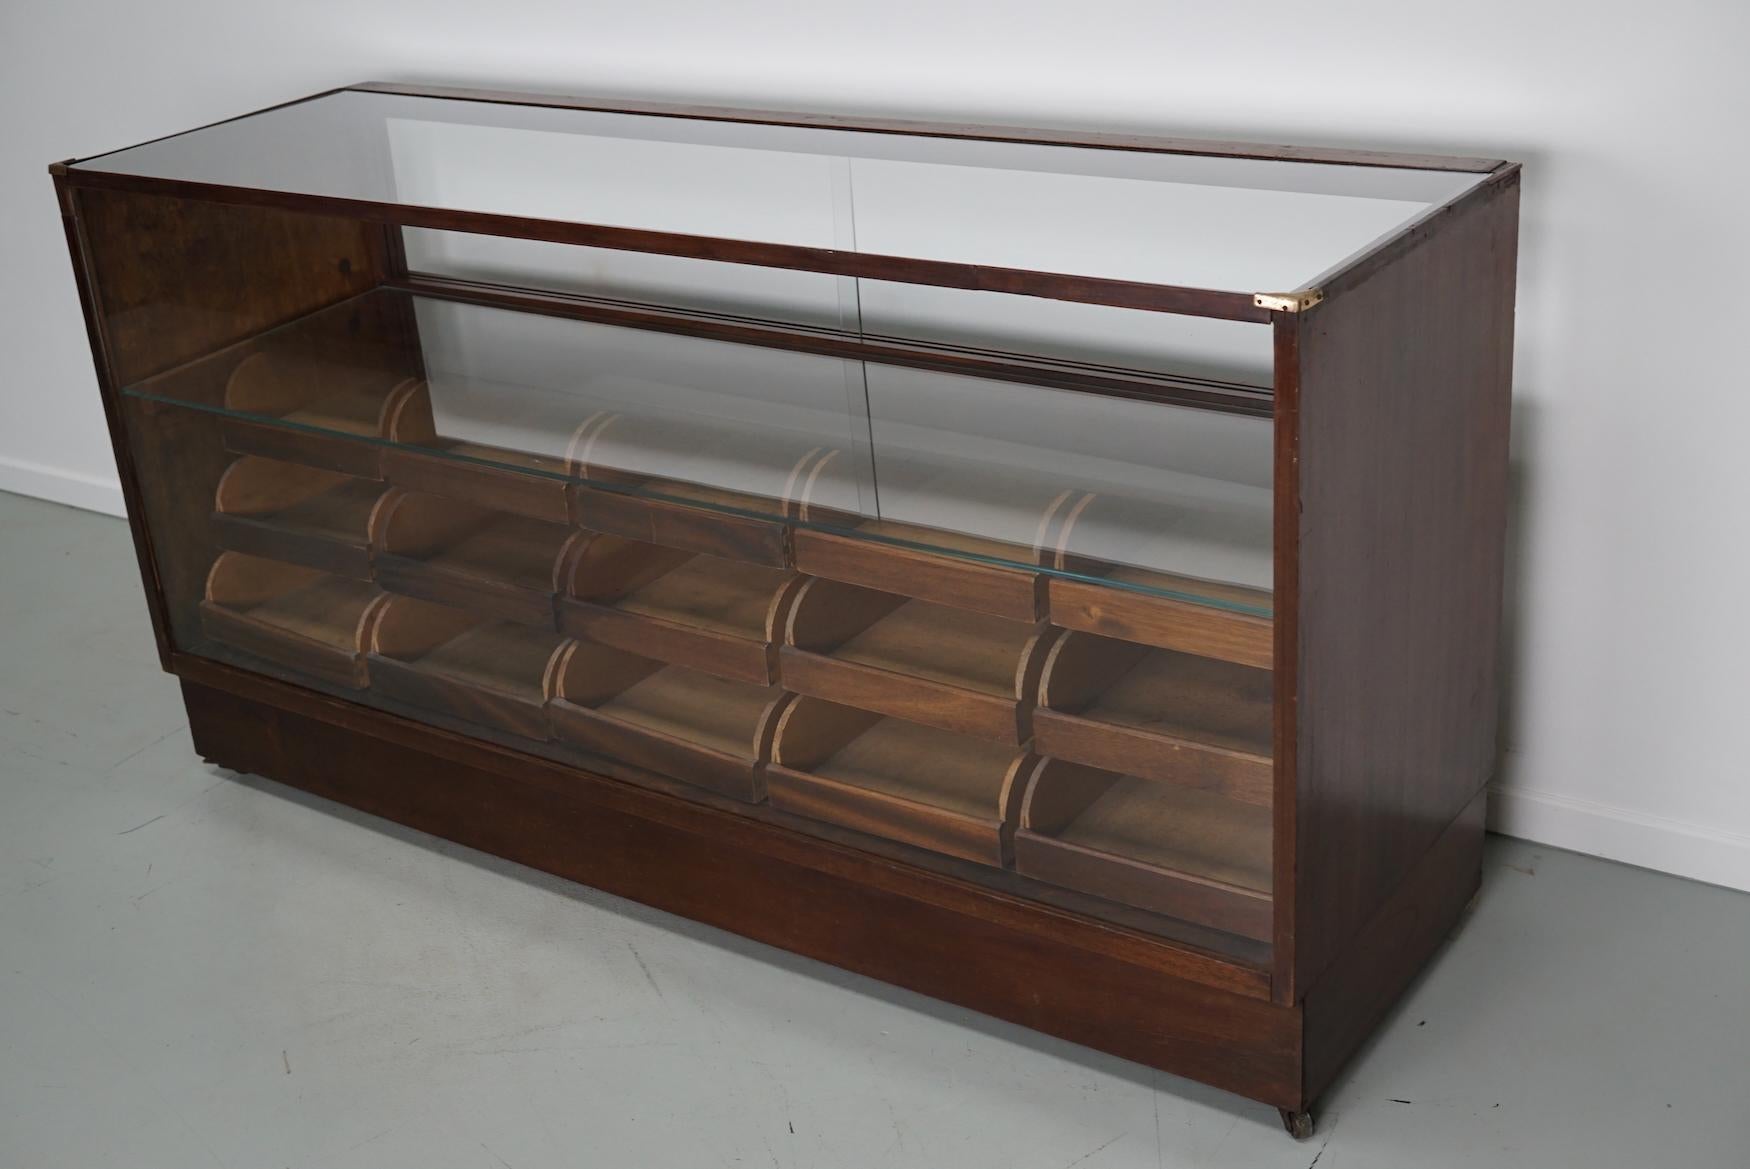 Mid-20th Century British Mahogany Haberdashery Cabinet or Shop Counter, 1940s For Sale